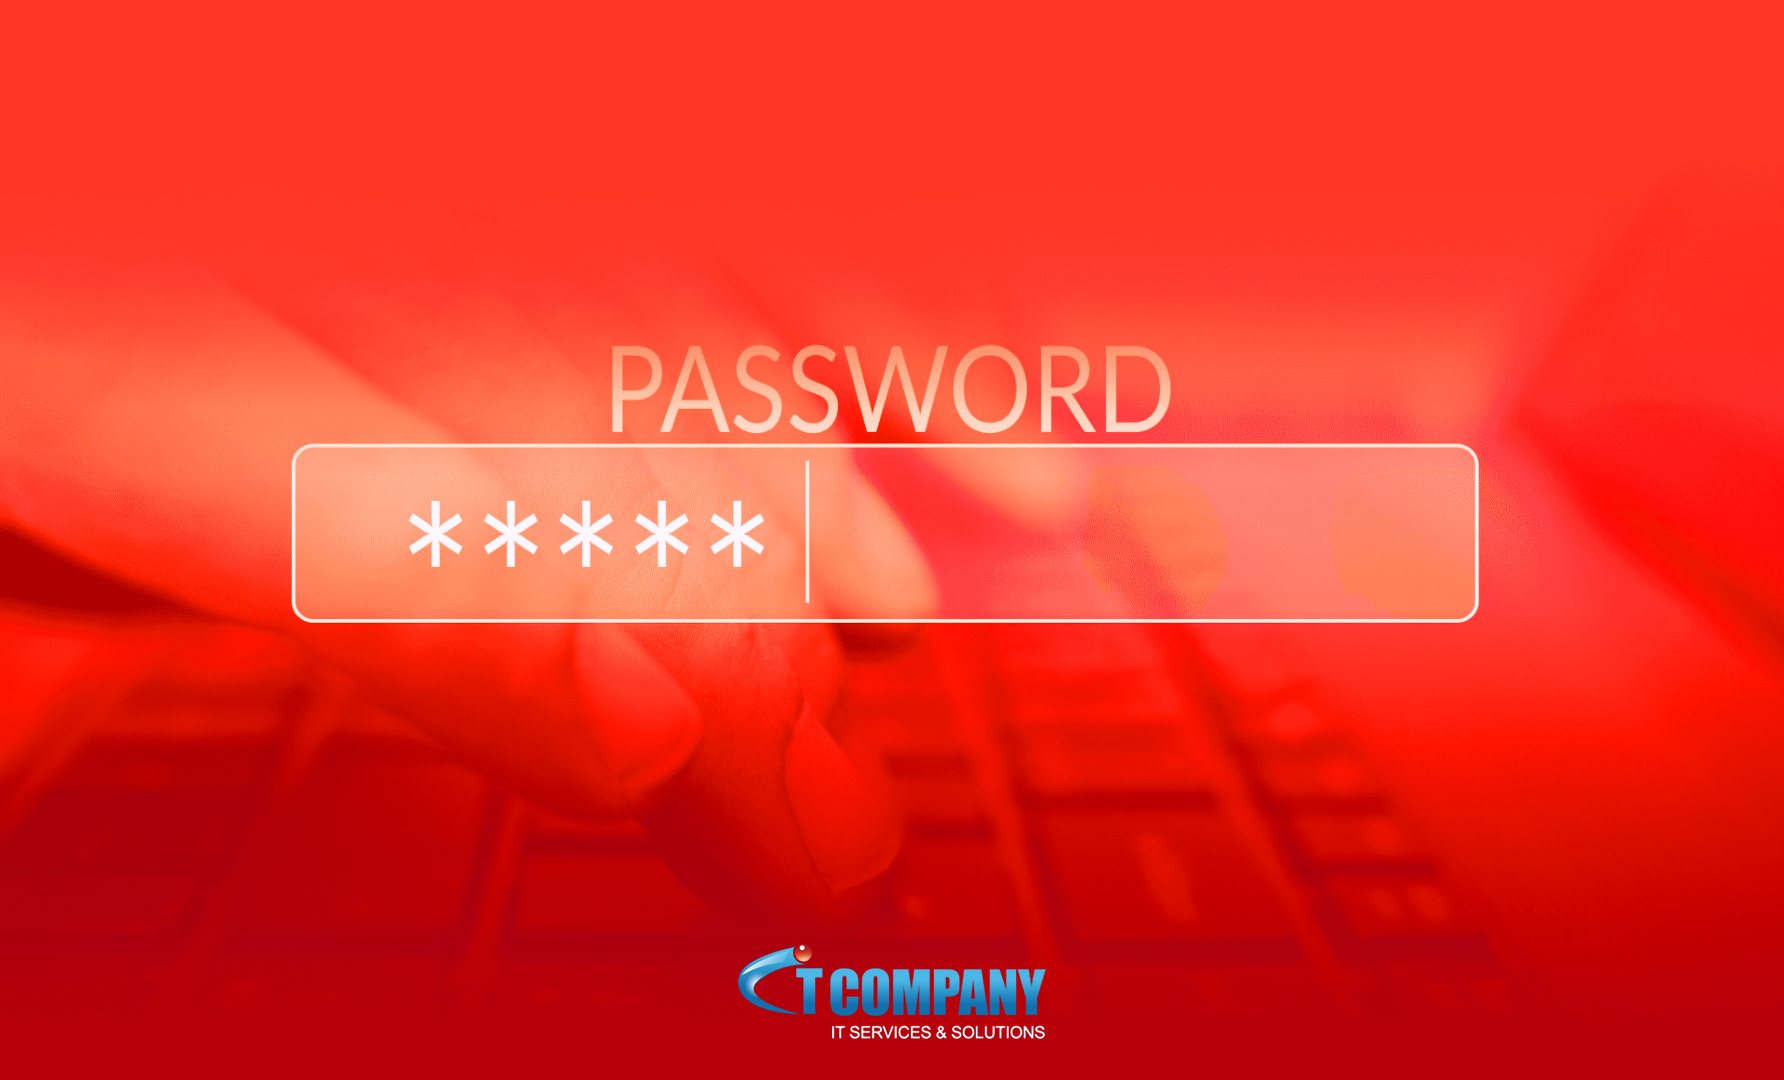 Strong passwords – key to your cybersecurity